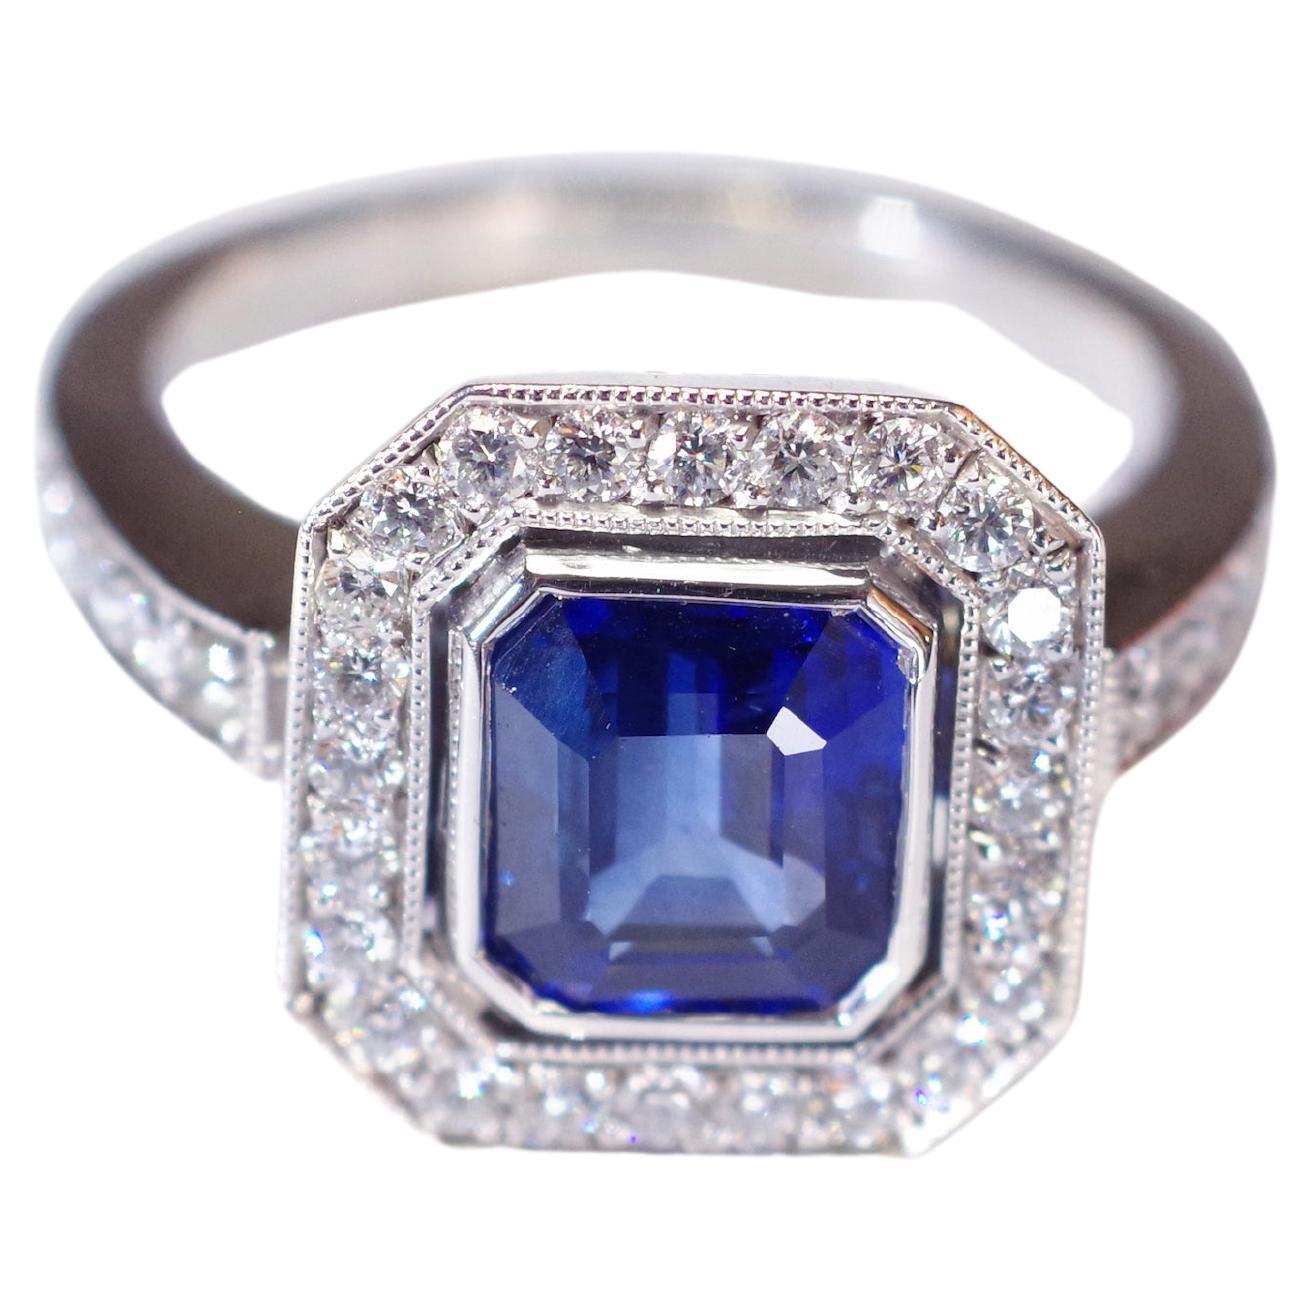 Art Deco style sapphire ring in 18k white gold, pre-owned sapphire wedding ring